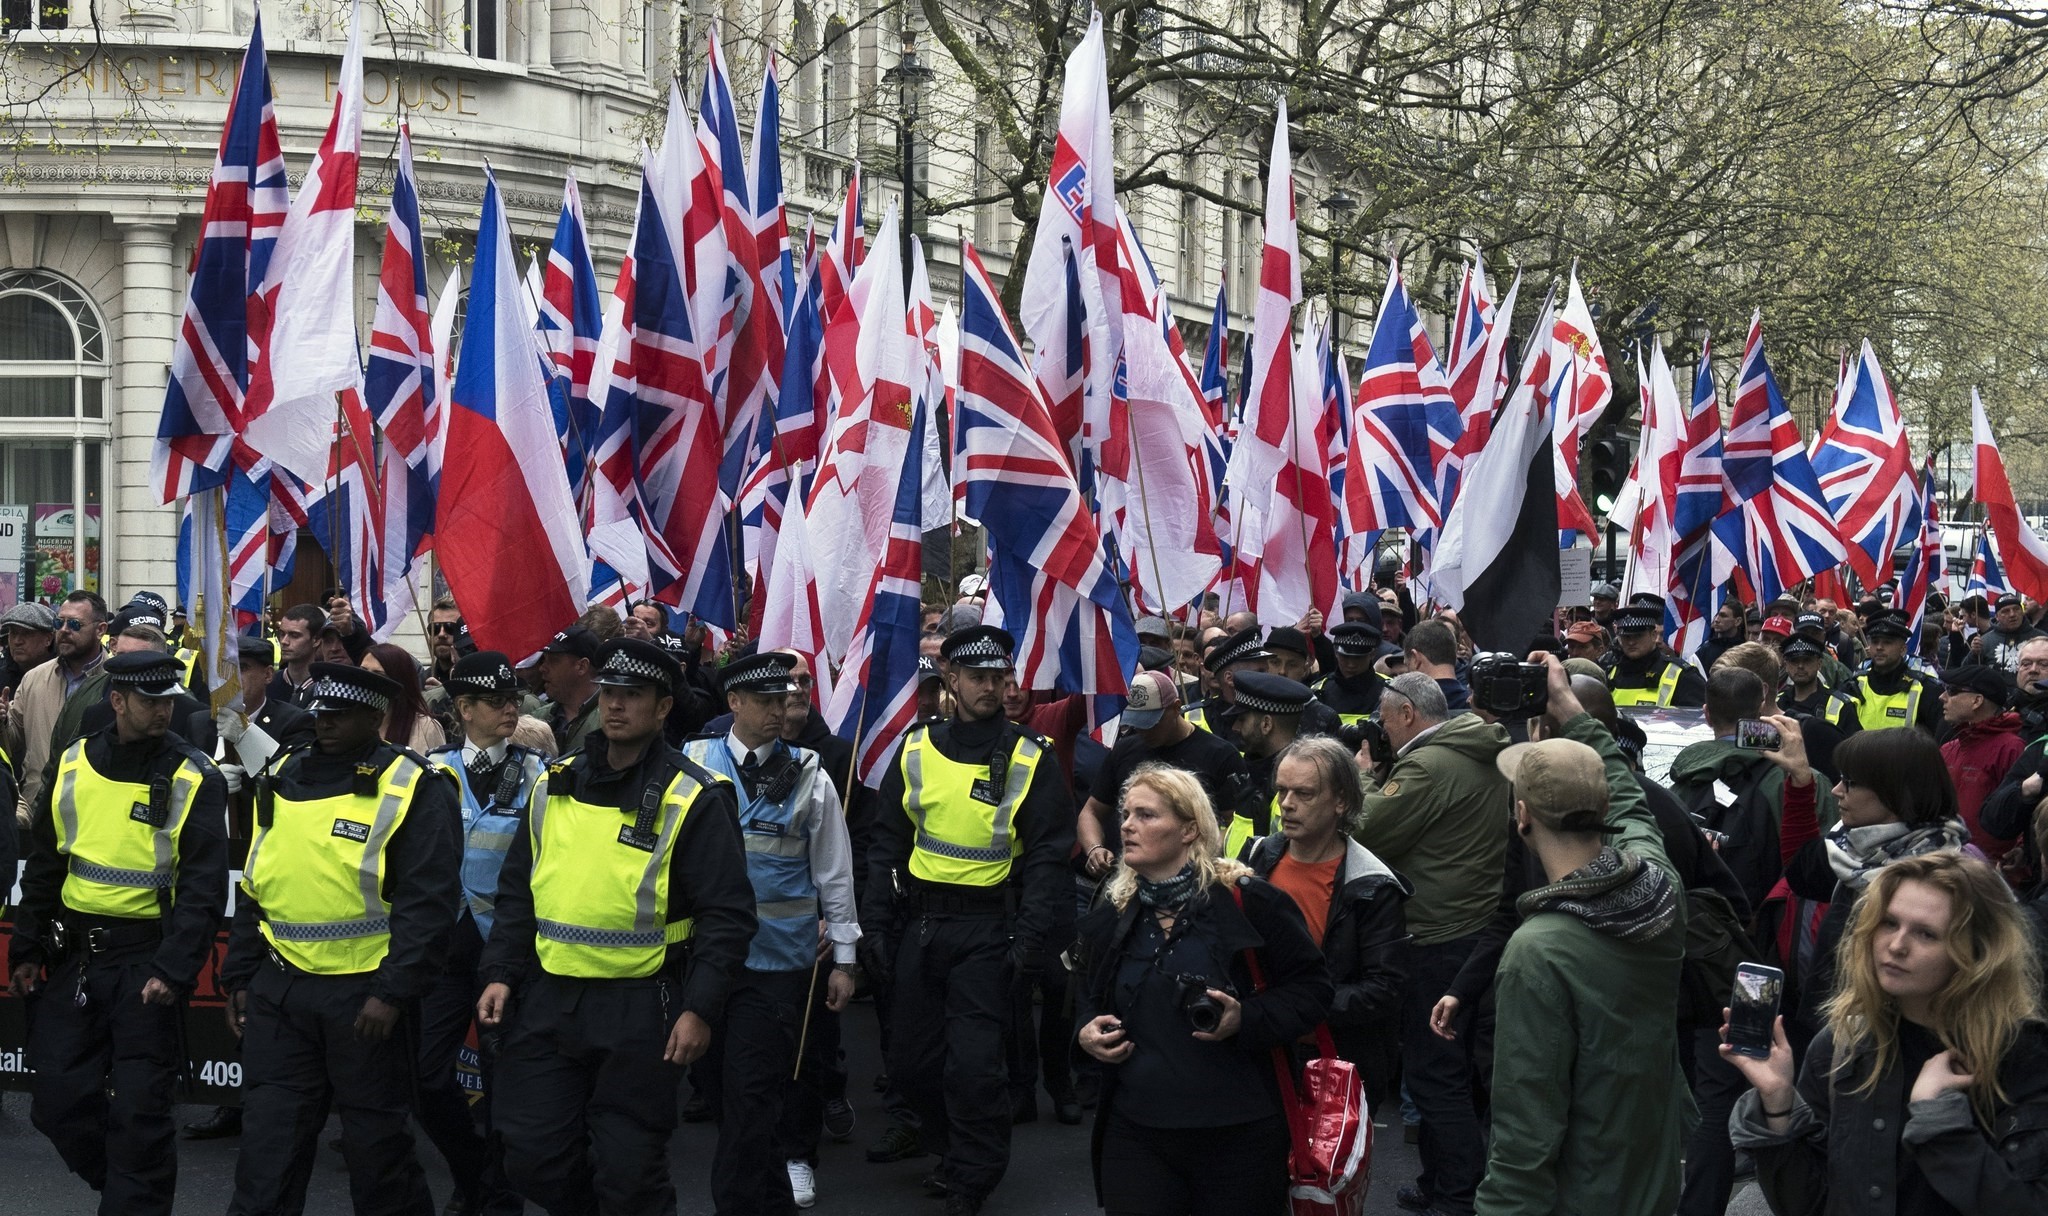  Members of the far-right political group 'Britain First' demonstrate in central London, Britain, 01 April 2017. (AP Photo)